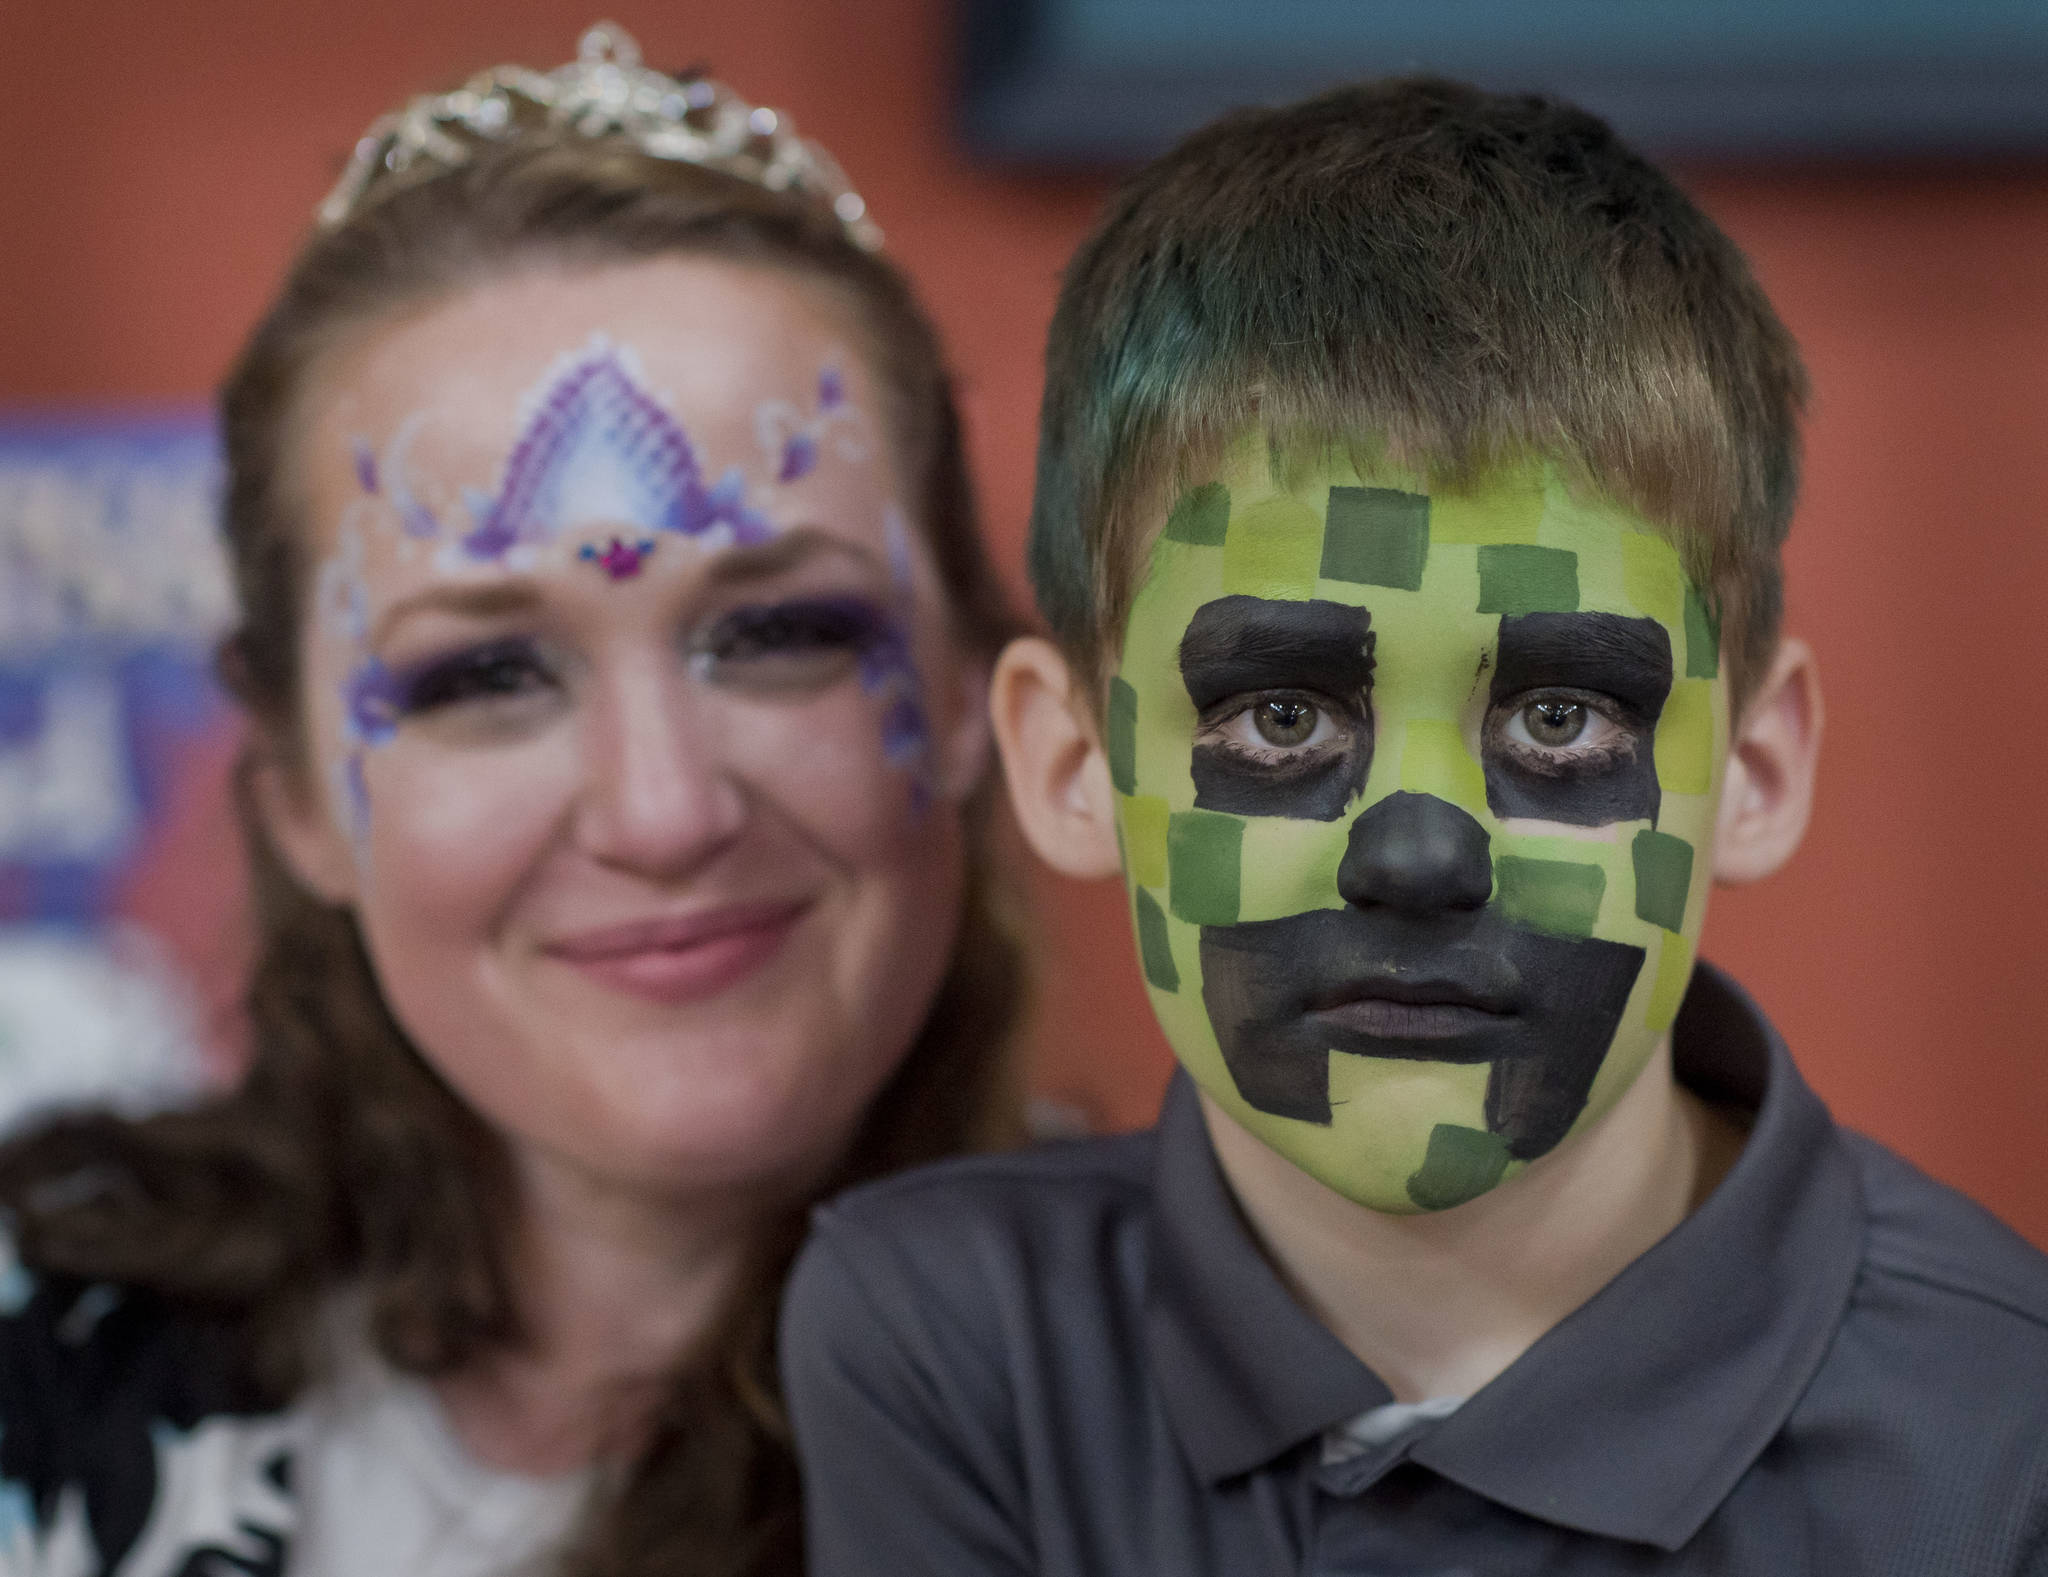 Jessica Snyder, of Sunny Days Body Art, poses with her son, Crispin, during the Block Party at the Juneau Arts & Culture Center on Friday, June 15, 2018. (Michael Penn | Juneau Empire)